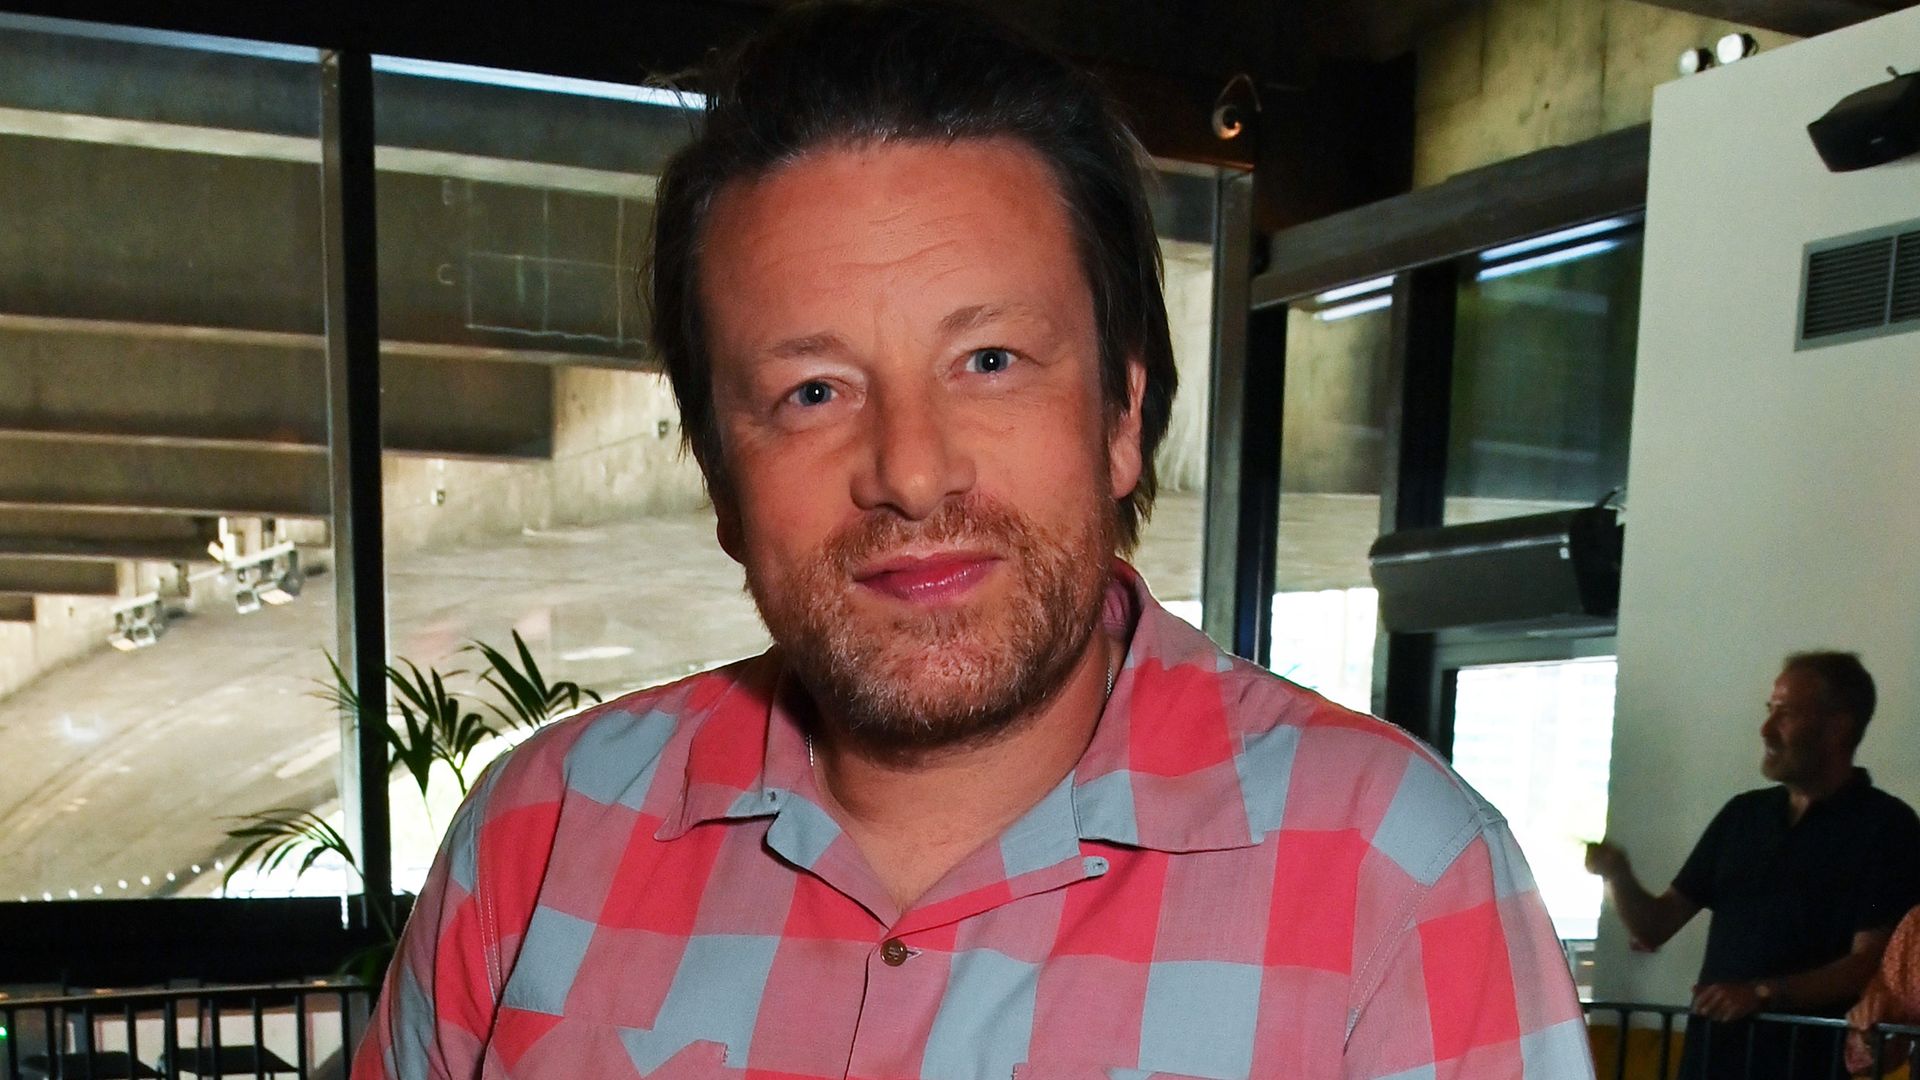 Jamie Oliver posing for a photo in a white an pink checked shirt at an event